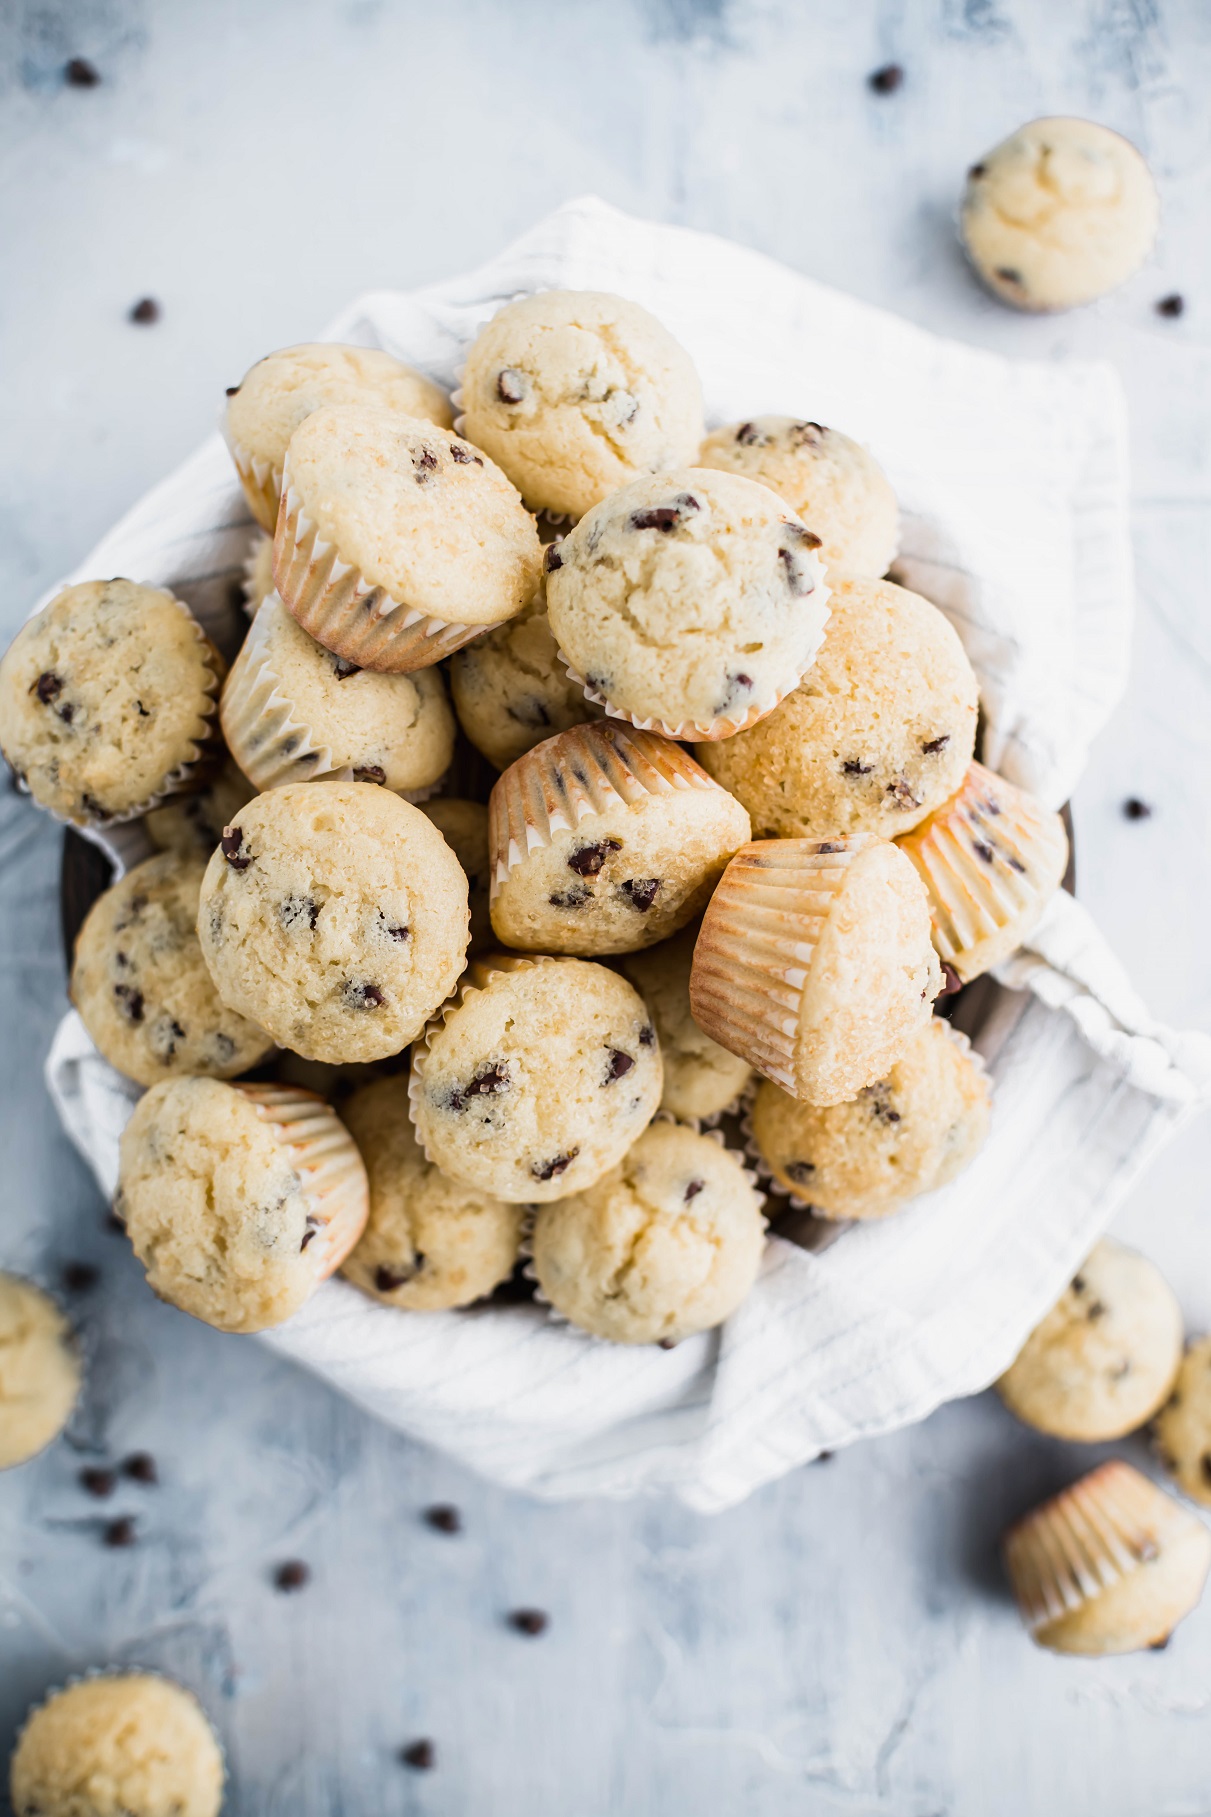 Bowl lined with a white and gray striped towel piled high with mini chocolate chip muffins.